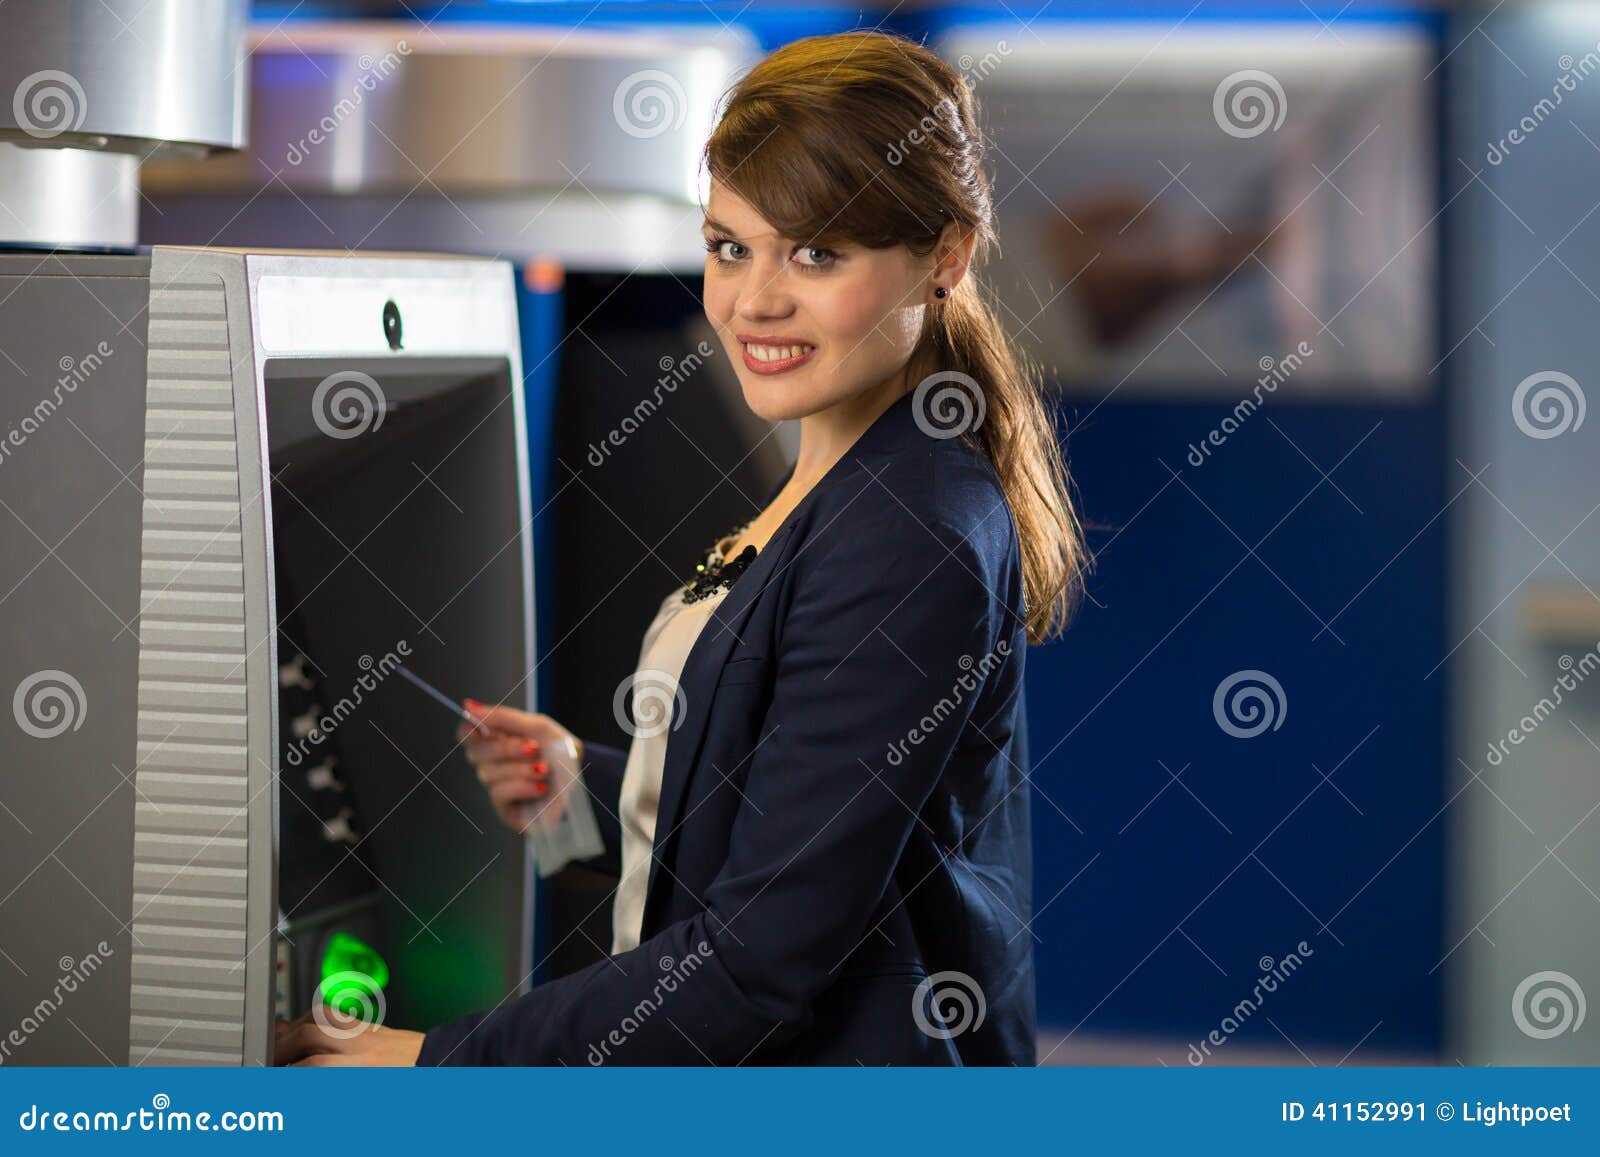 pretty, young woman withdrawing money from her credit card